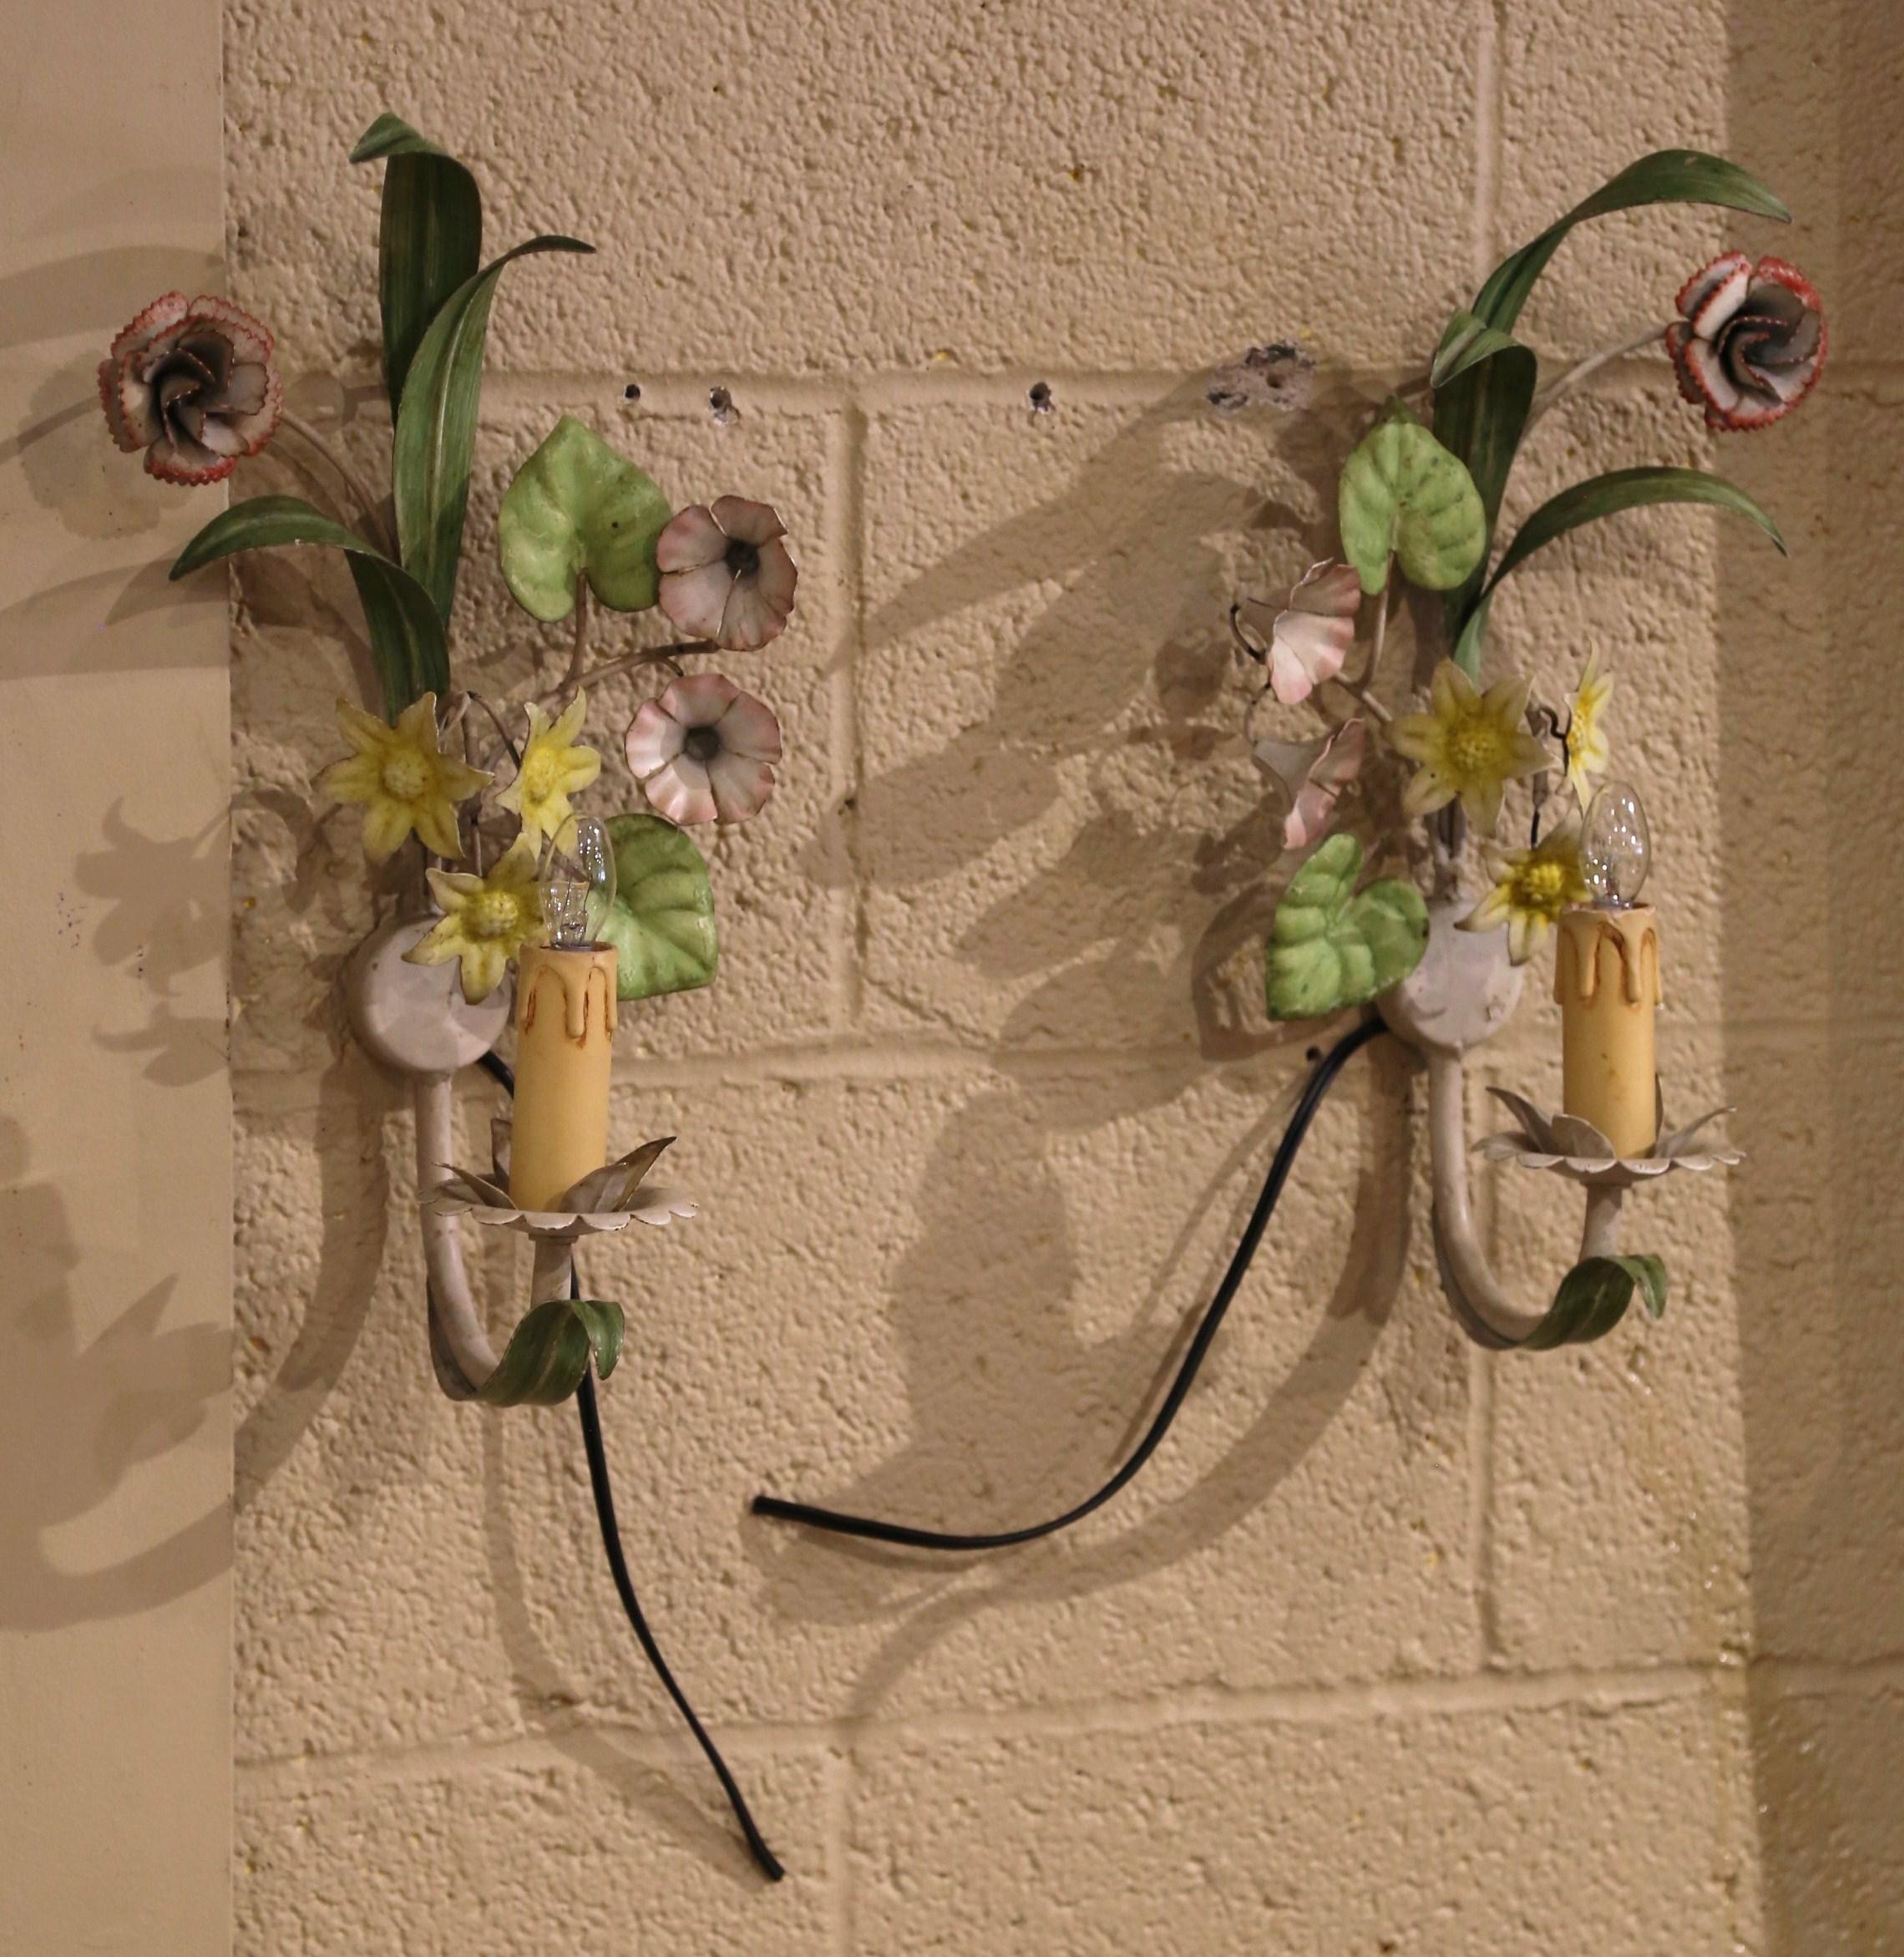 This elegant pair of antique sconces was created in France, circa 1920. The feminine wall fixtures are decorated with hand-painted pink petunia and yellow daffodil flowers, accented with a variety of green leaves. Each colorful wall light has one